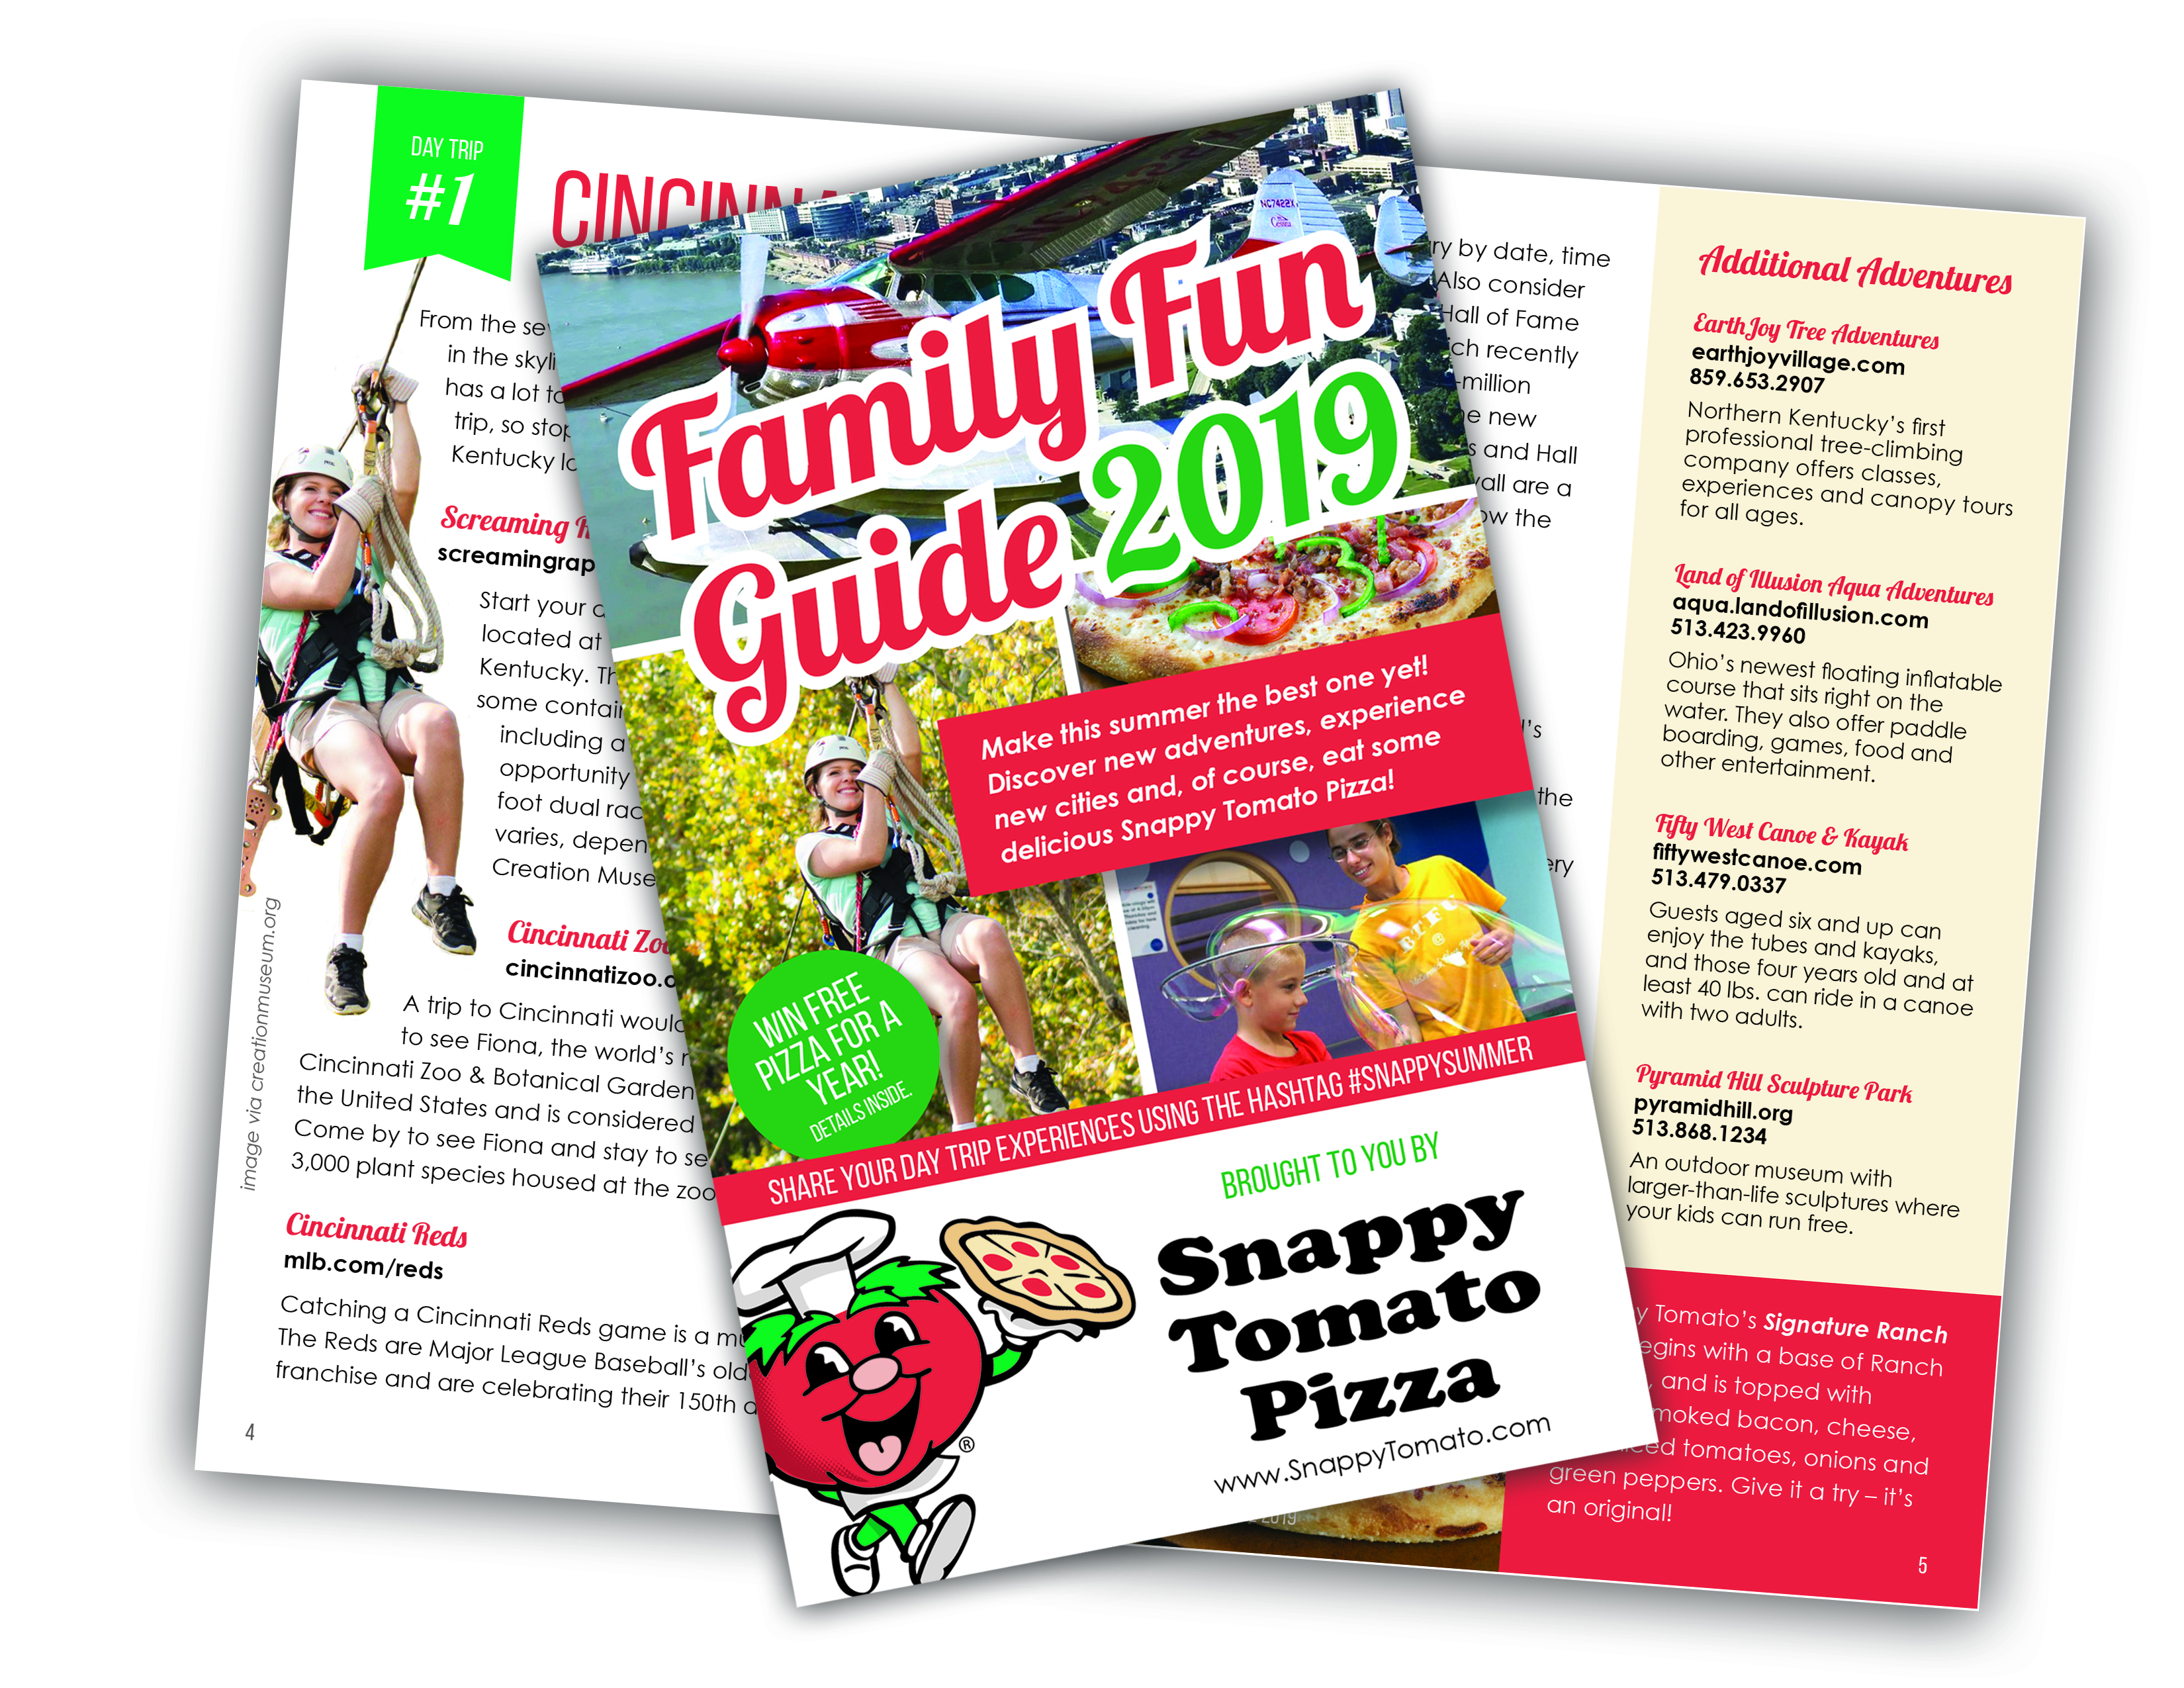 Family Fun Guide 2019 Image:
Snappy Tomato Pizza Family Fun Guide 2019 - A 16-page Family Focused Day Trip Travel Guide including Knoxville, Tennessee; Rabbit Hash, Kentucky; Cincinnati, Ohio; Columbus, Indiana; and Adams County, Ohio. #SnappySummer - www.SnappyTomato.com
#Winner #Pizza #OhioTravel #SnappySummer 
#SnappyTomato
